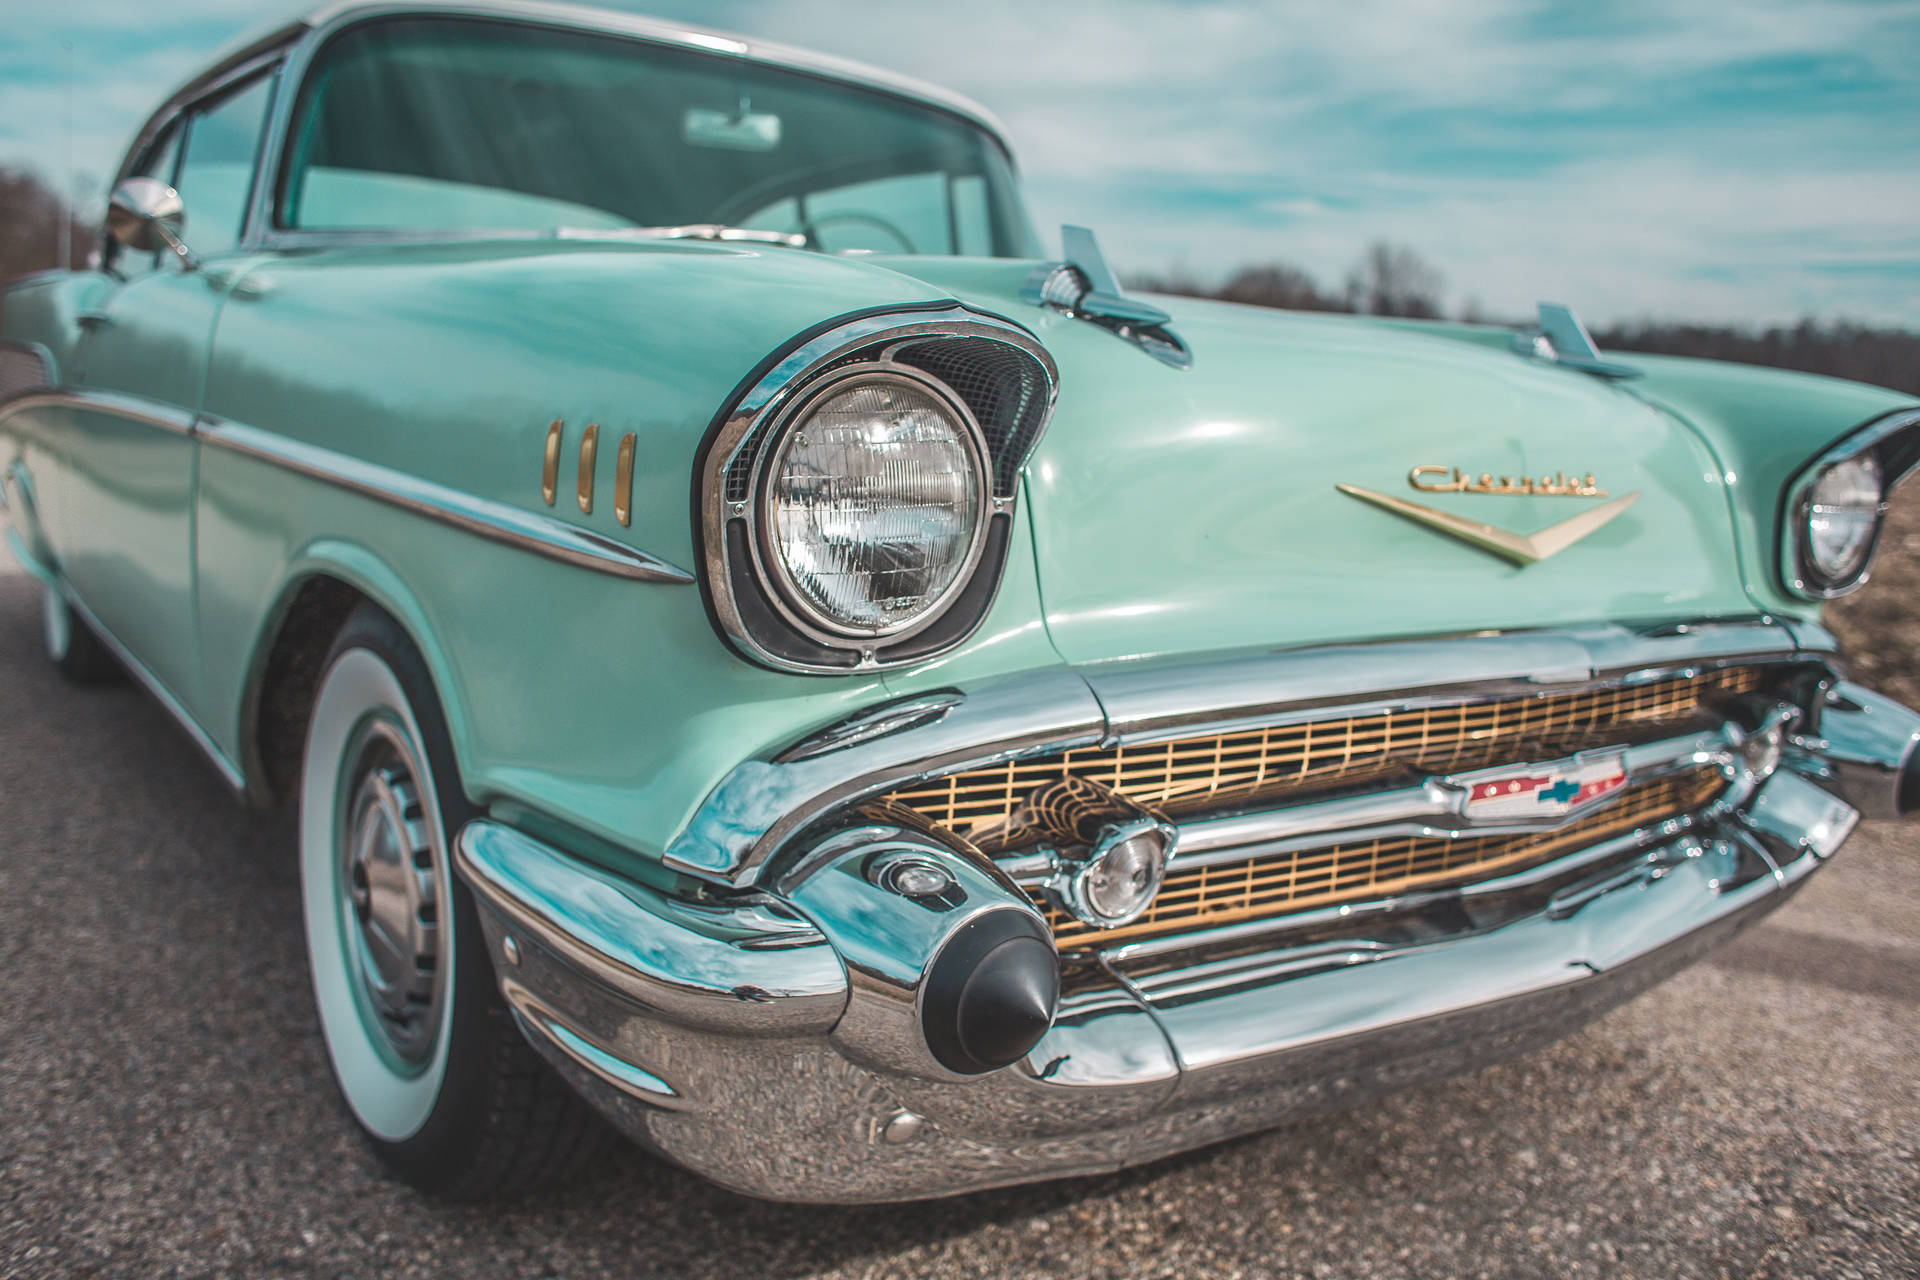 Classic Teal Chevrolet Car Background